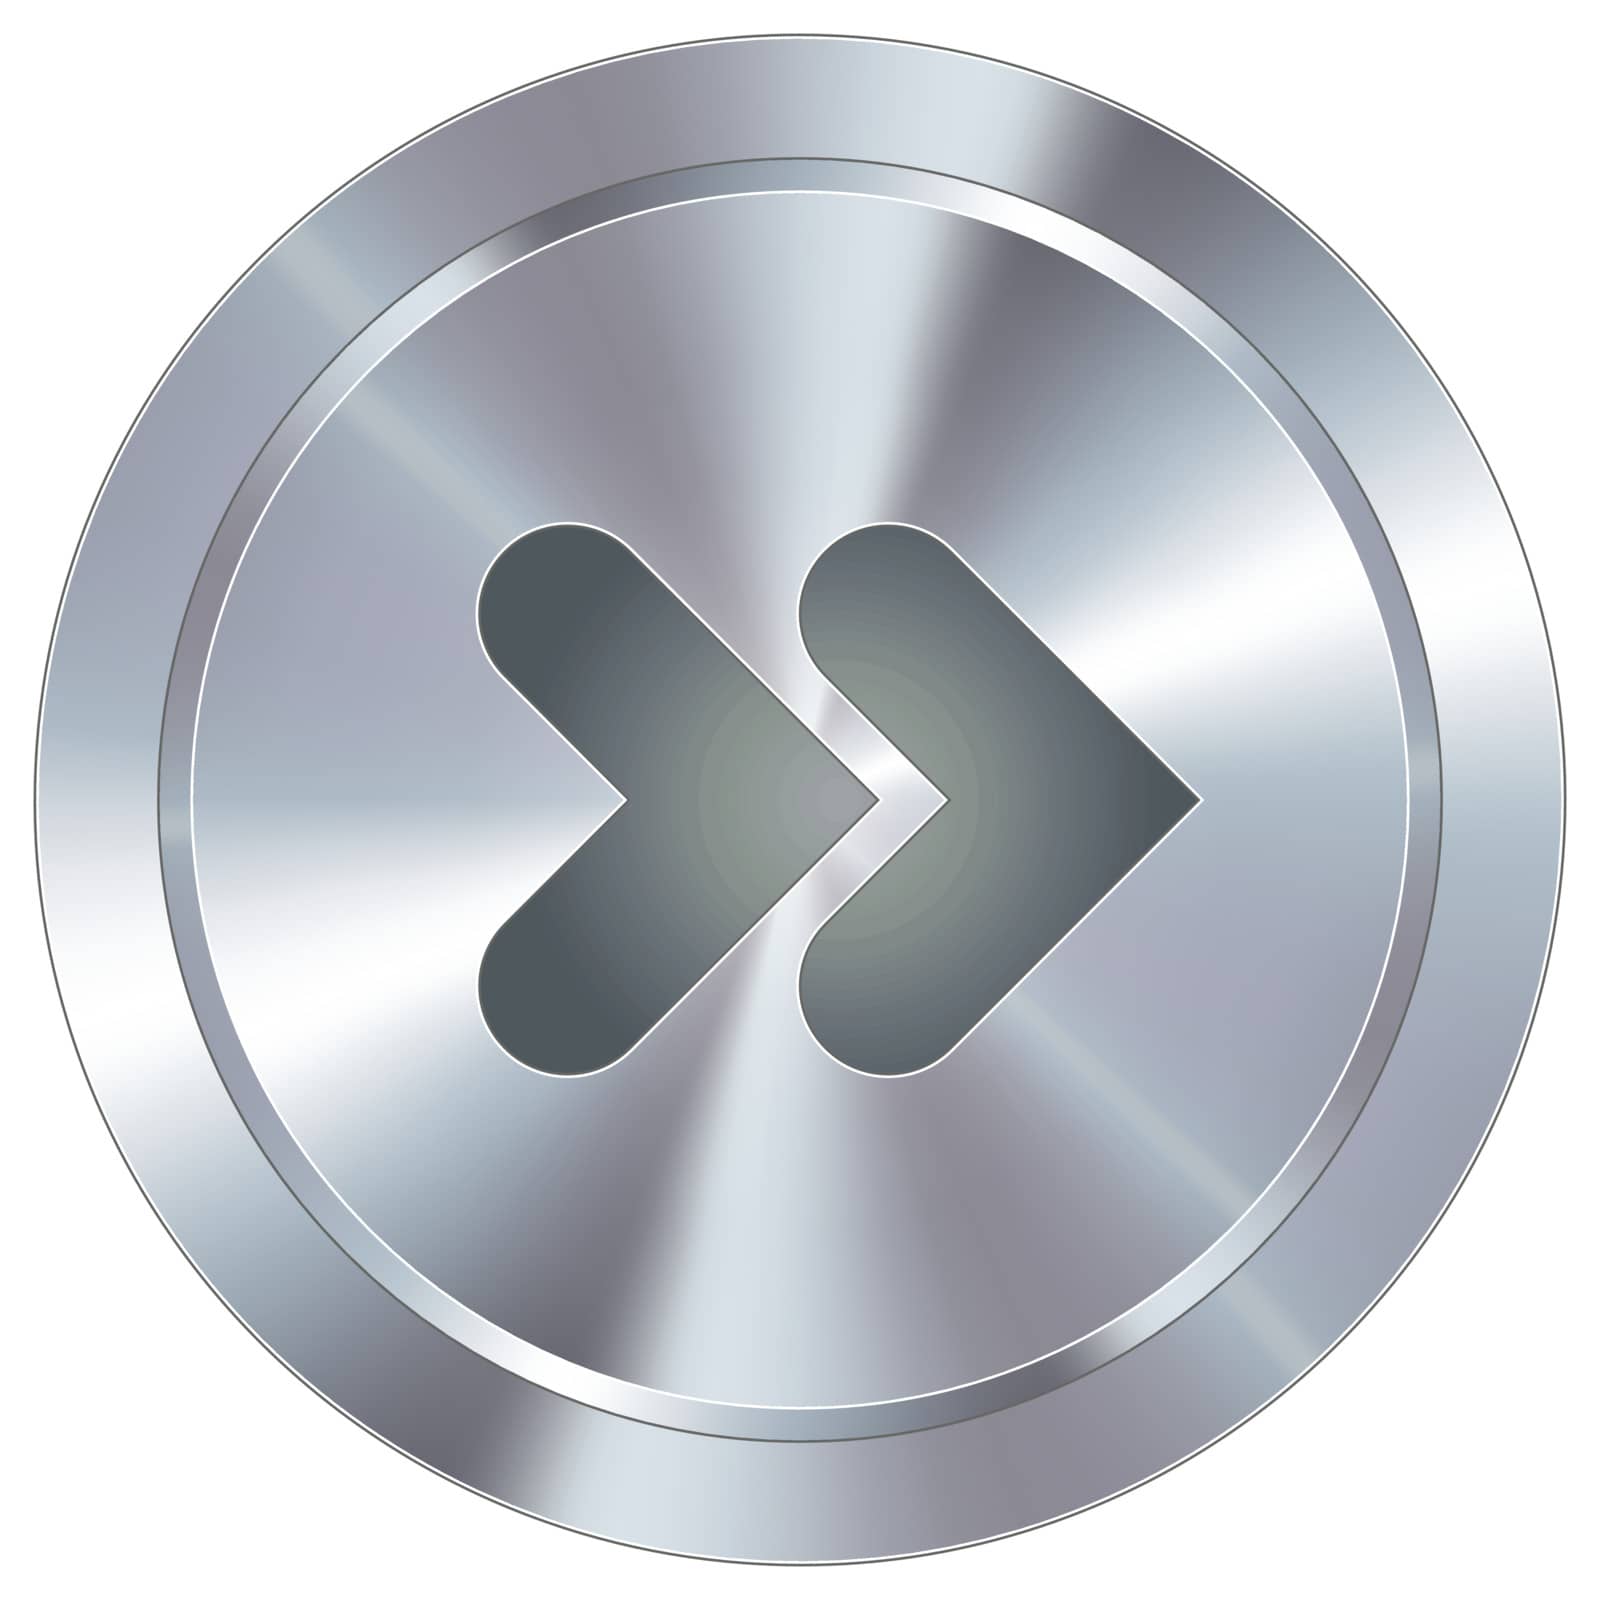 Forward or skip media player icon on round stainless steel modern industrial button suitable for use as a website accent, on promotional materials, or in advertisements.